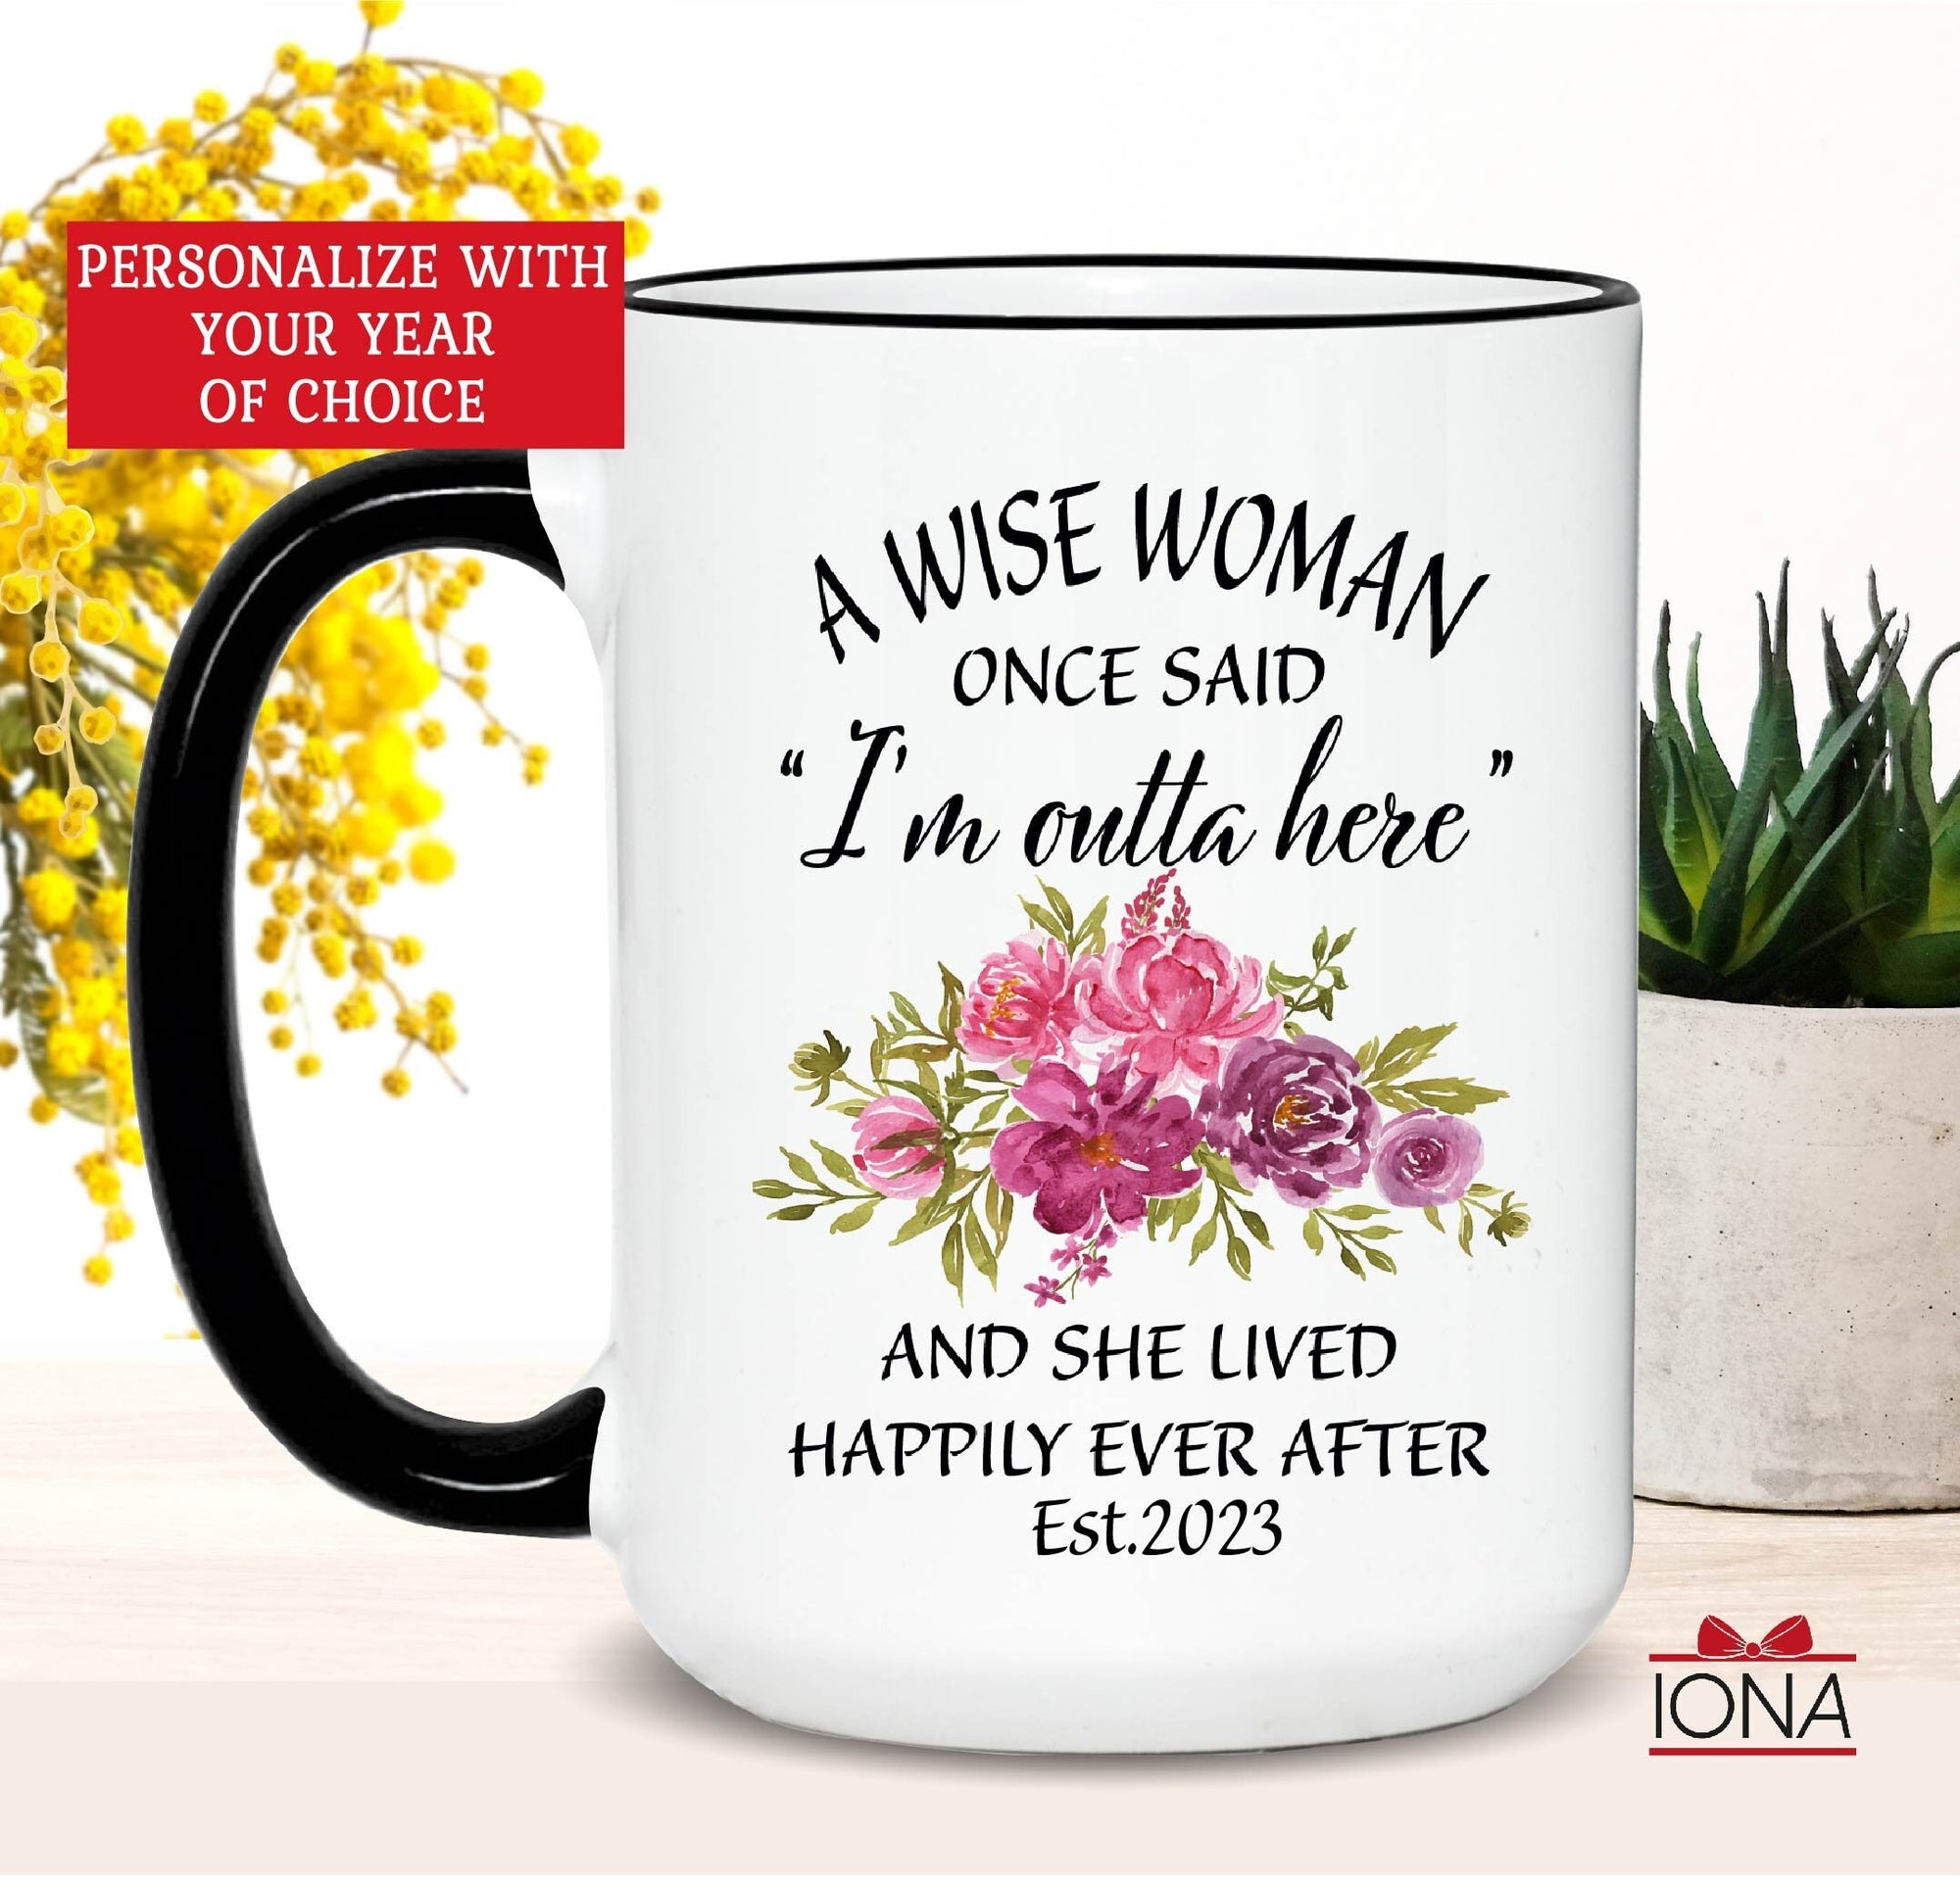 Retirement Gifts for Women, A Wise Woman Once Said, Funny Retirement Gift for Women from Coworkers, Retirement Coffee Mug, Happy Retirement